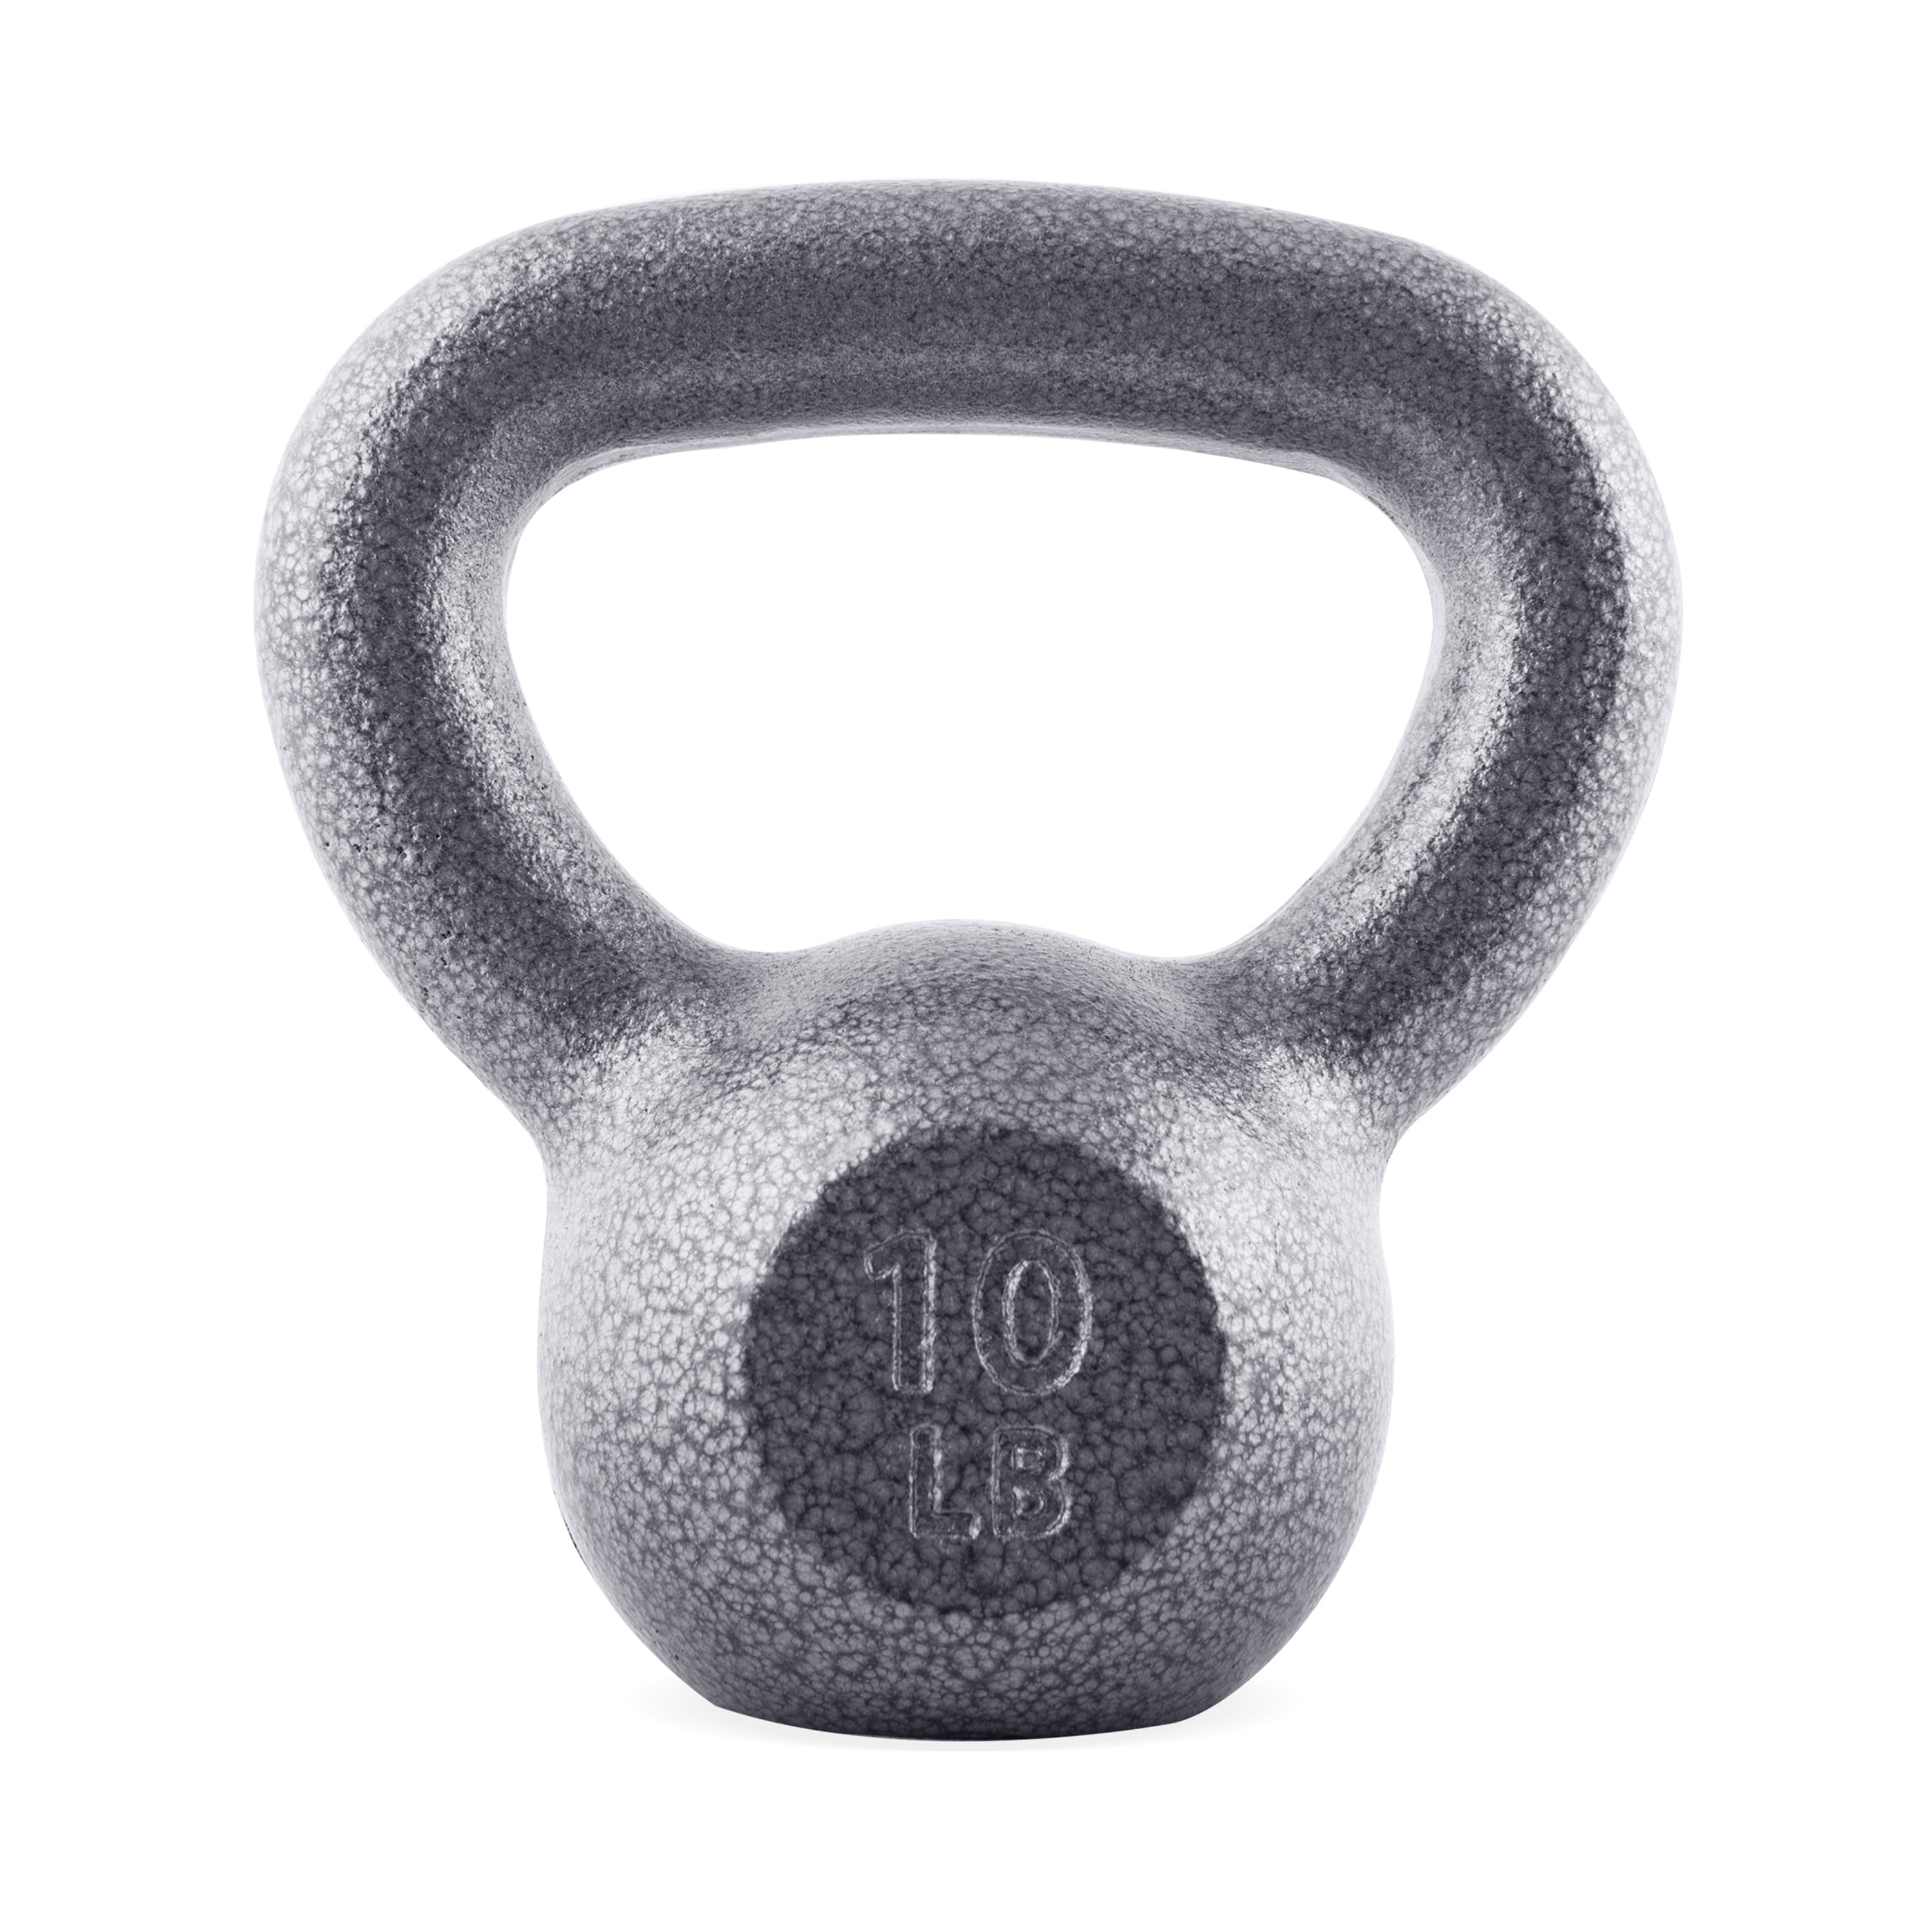 Solid Cast Iron powder coated Kettlebell Workout 5 10 15 20 25 30 35 40 45 50 lb 